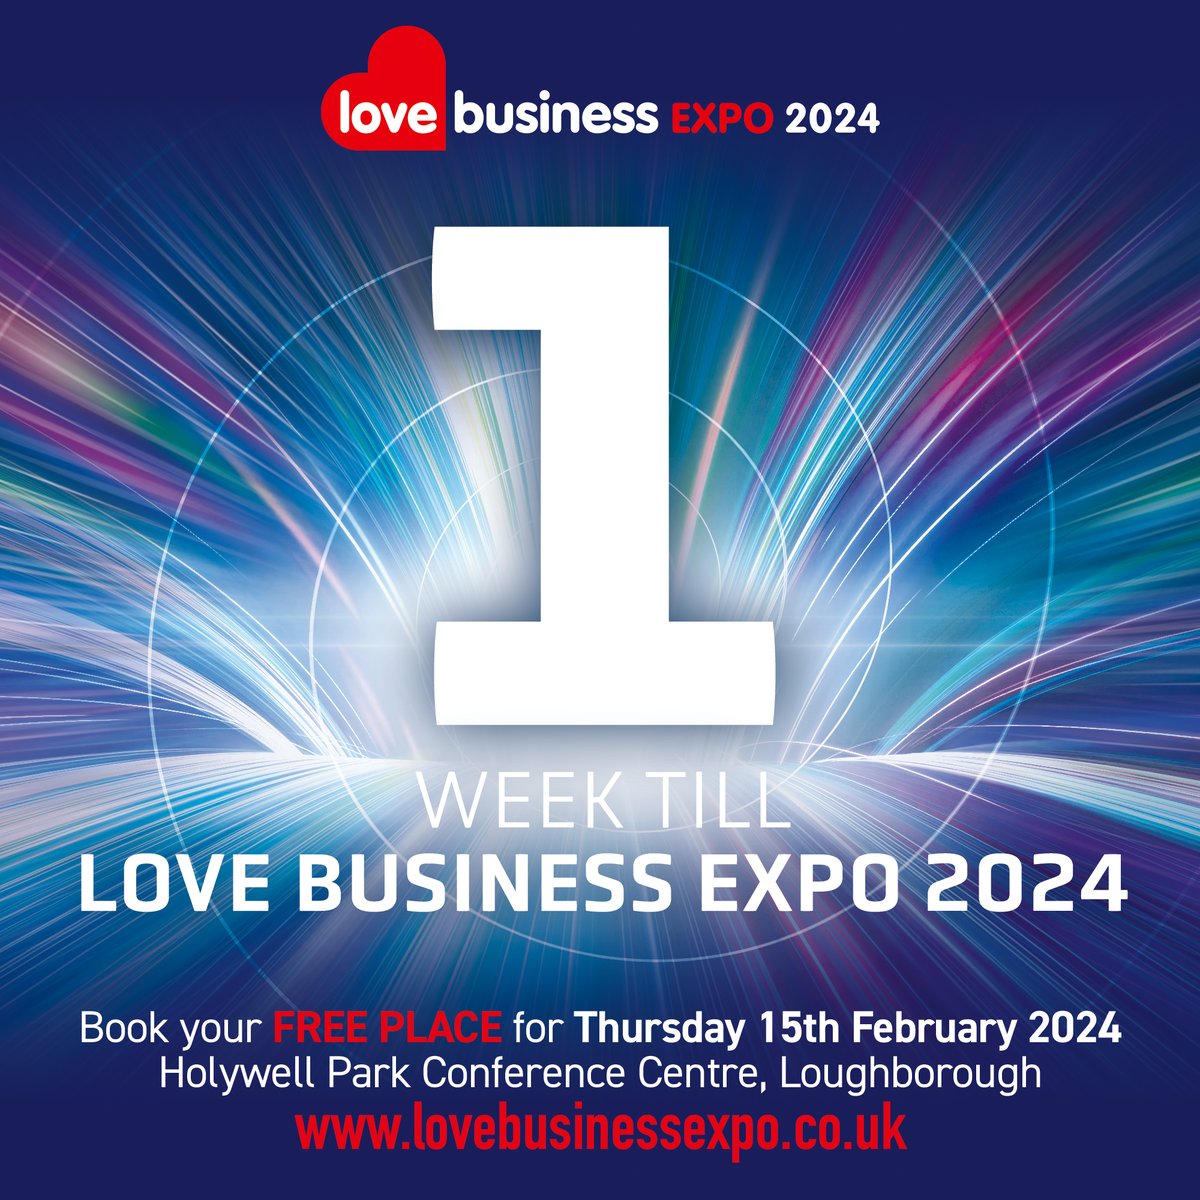 Only 1 Week till Love Business EXPO 2024! Thursday 15th February at Holywell Park Conference Centre in Loughborough. Book your FREE delegate ticket for Love Business EXPO 2024. lovebusinessexpo.co.uk #LoveBusinessEXPO #love #business #event #east #midlands #eastmidlands